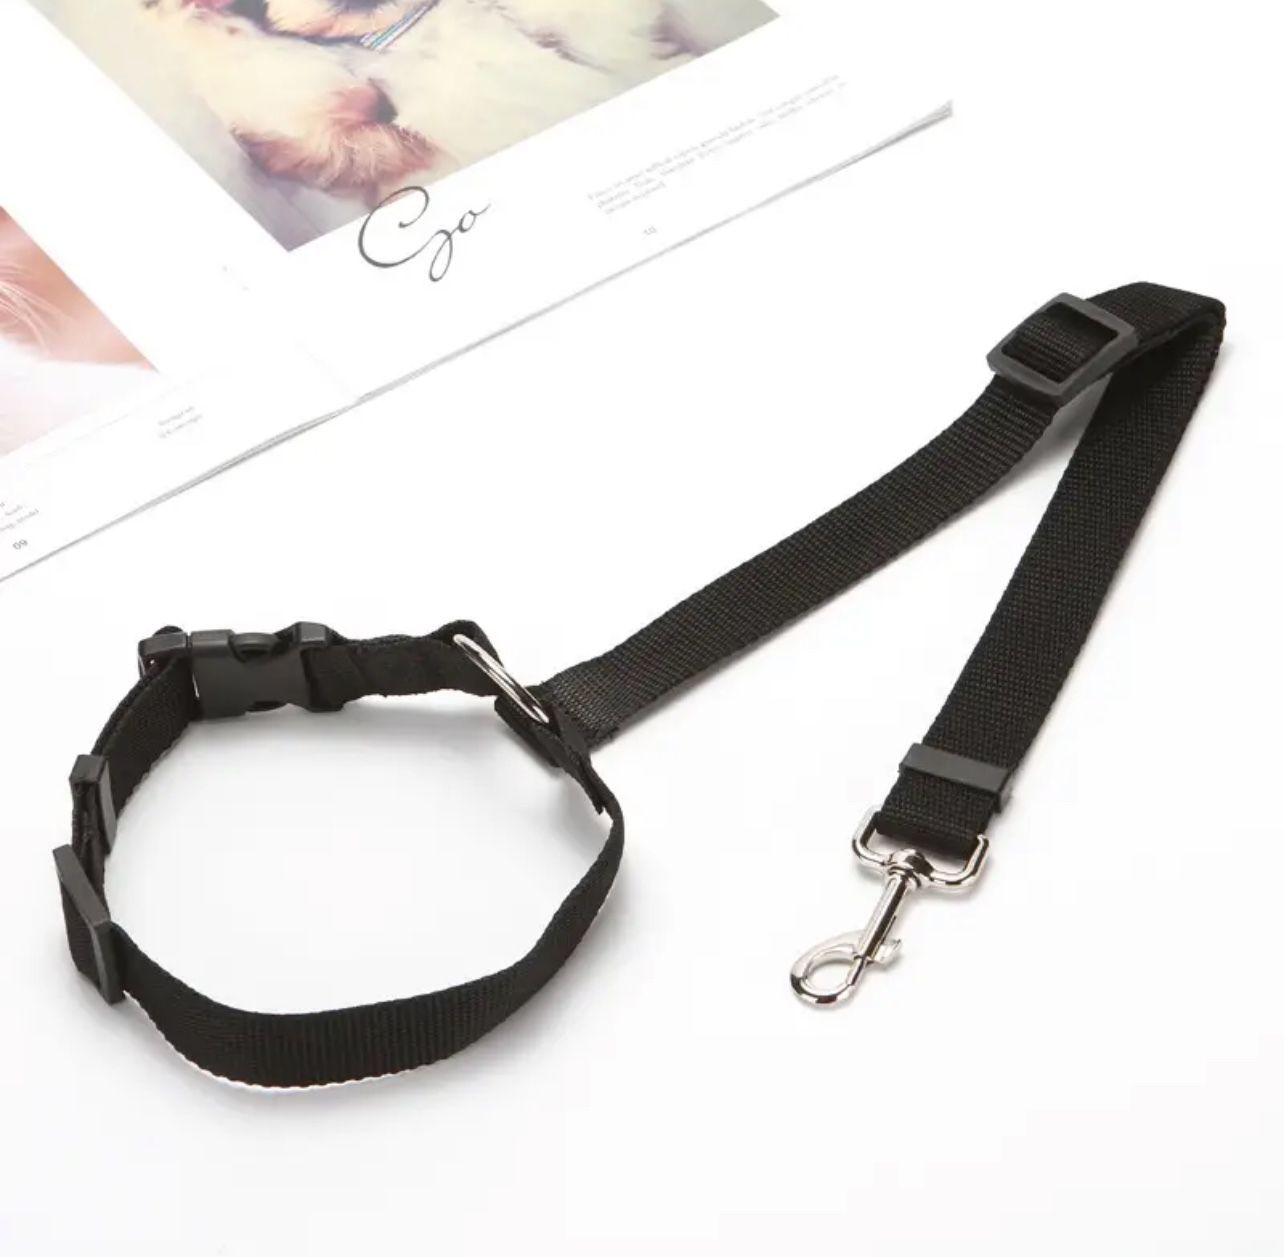 Adjustable Nylon Pet Car Seat Belt: Safety harness for dogs & cats